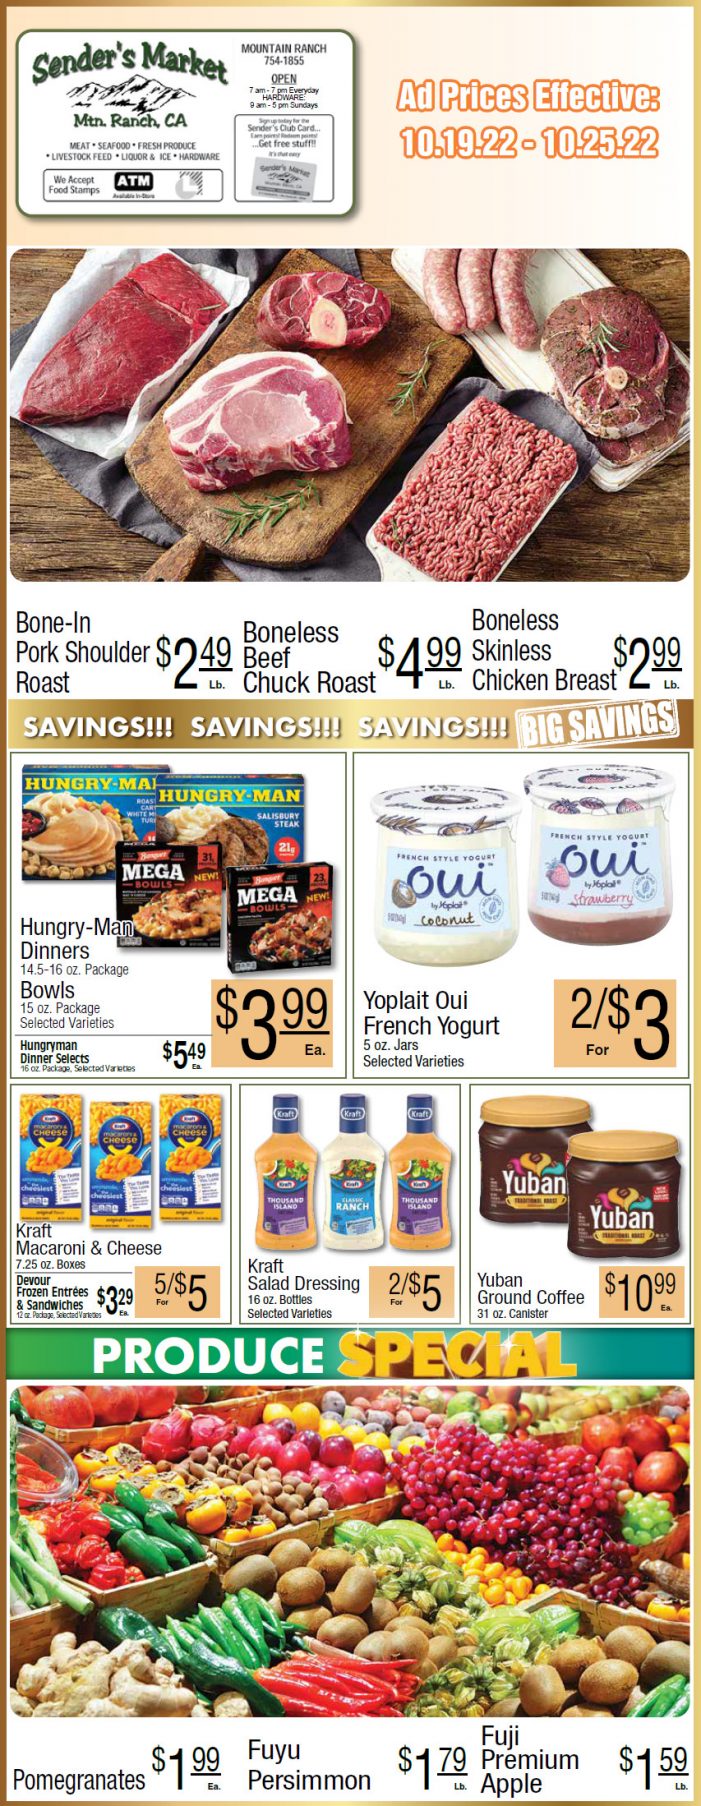 Sender’s Market Weekly Ad & Grocery Specials Through October 25th. Shop Local & Save!